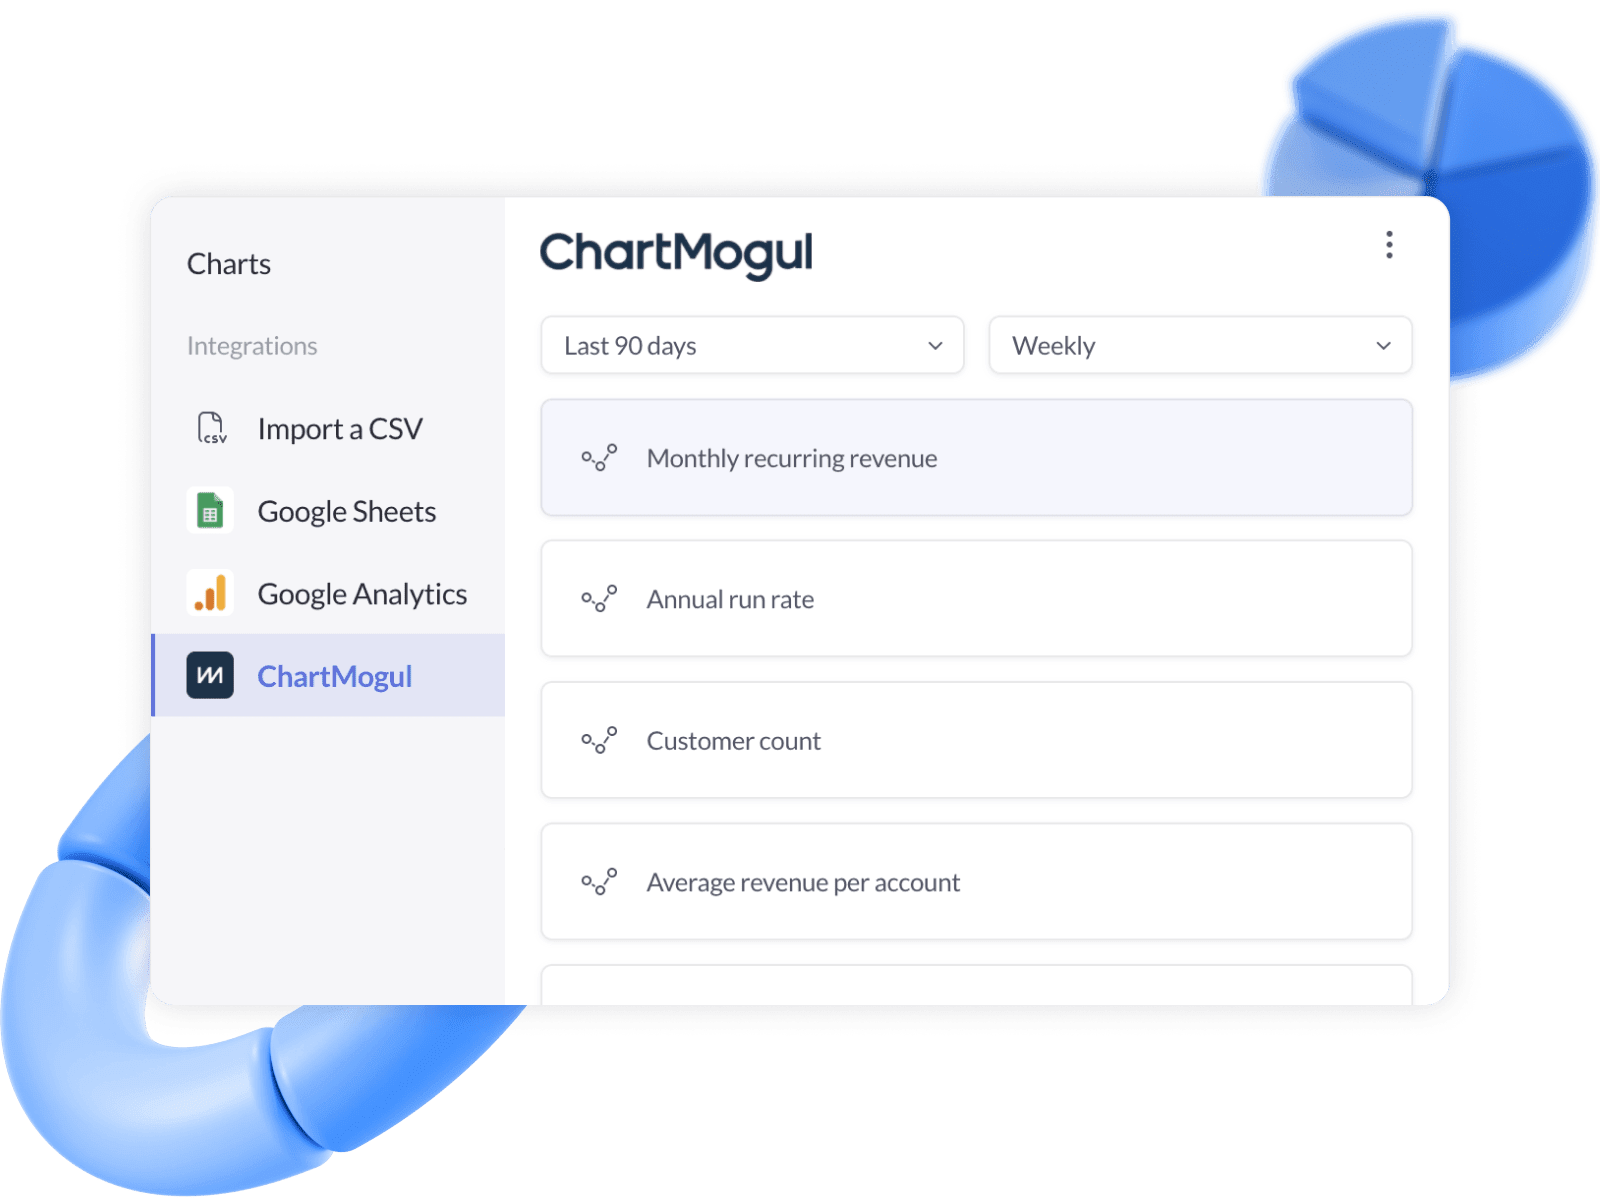 Image of the Pitch modal that allows users to add data to their slide showing Google Analytics, Google Sheets and ChartMogul